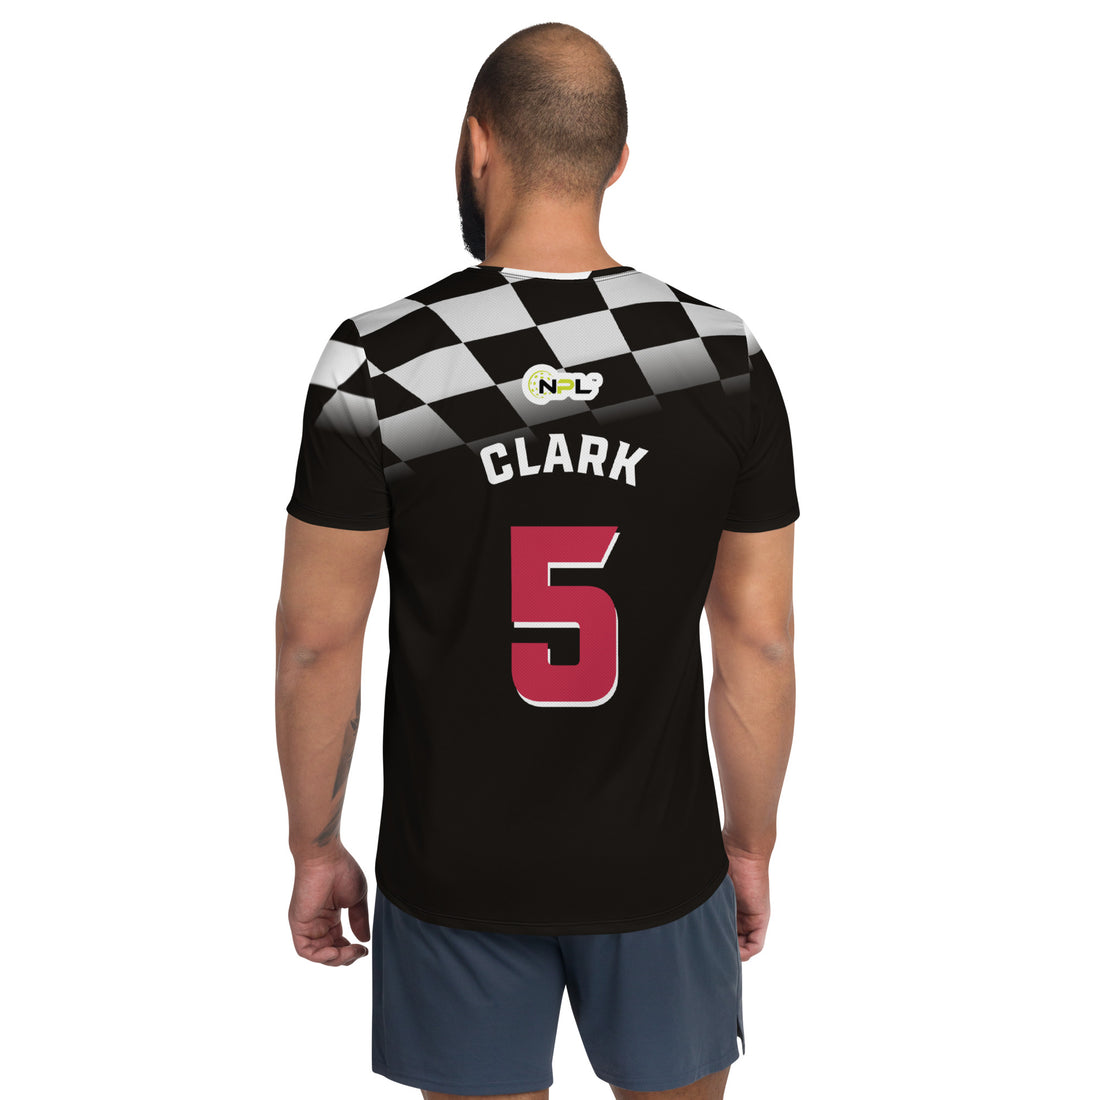 Martin Clark 5 Indy Drivers™ SKYblue™ 2023 Authentic Jersey - Black